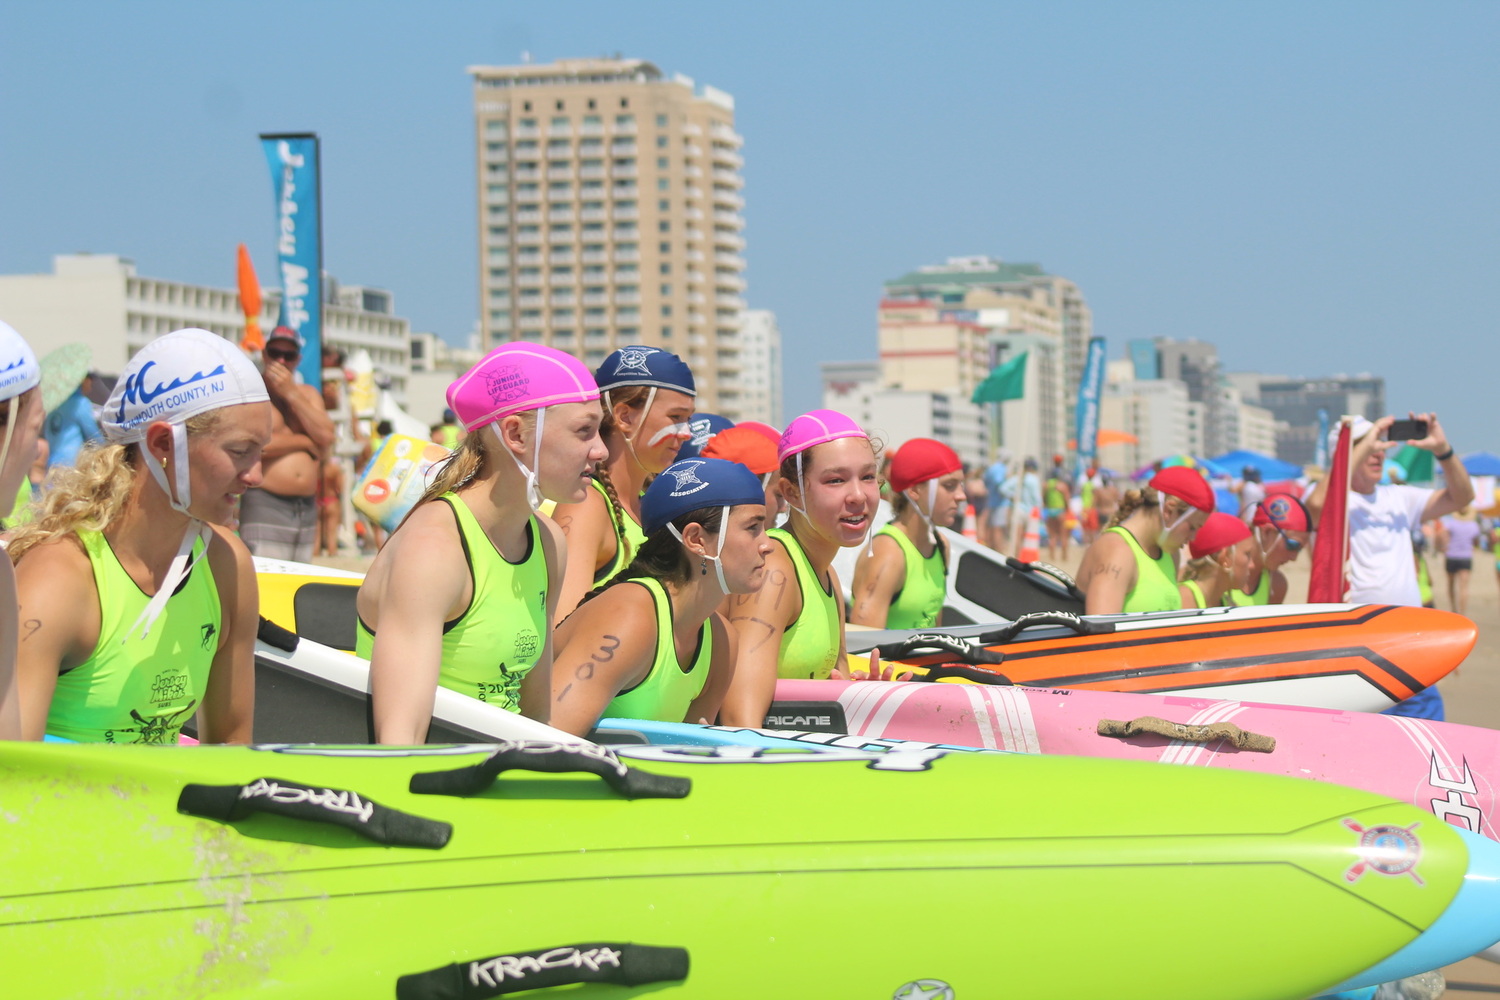 The Hampton Lifeguard Association took a team of nearly 100 lifeguards--both juniors and adults--to the USLA National Lifeguard Championships in Virginia Beach last week. NICOLE CASTILLO PHOTOS